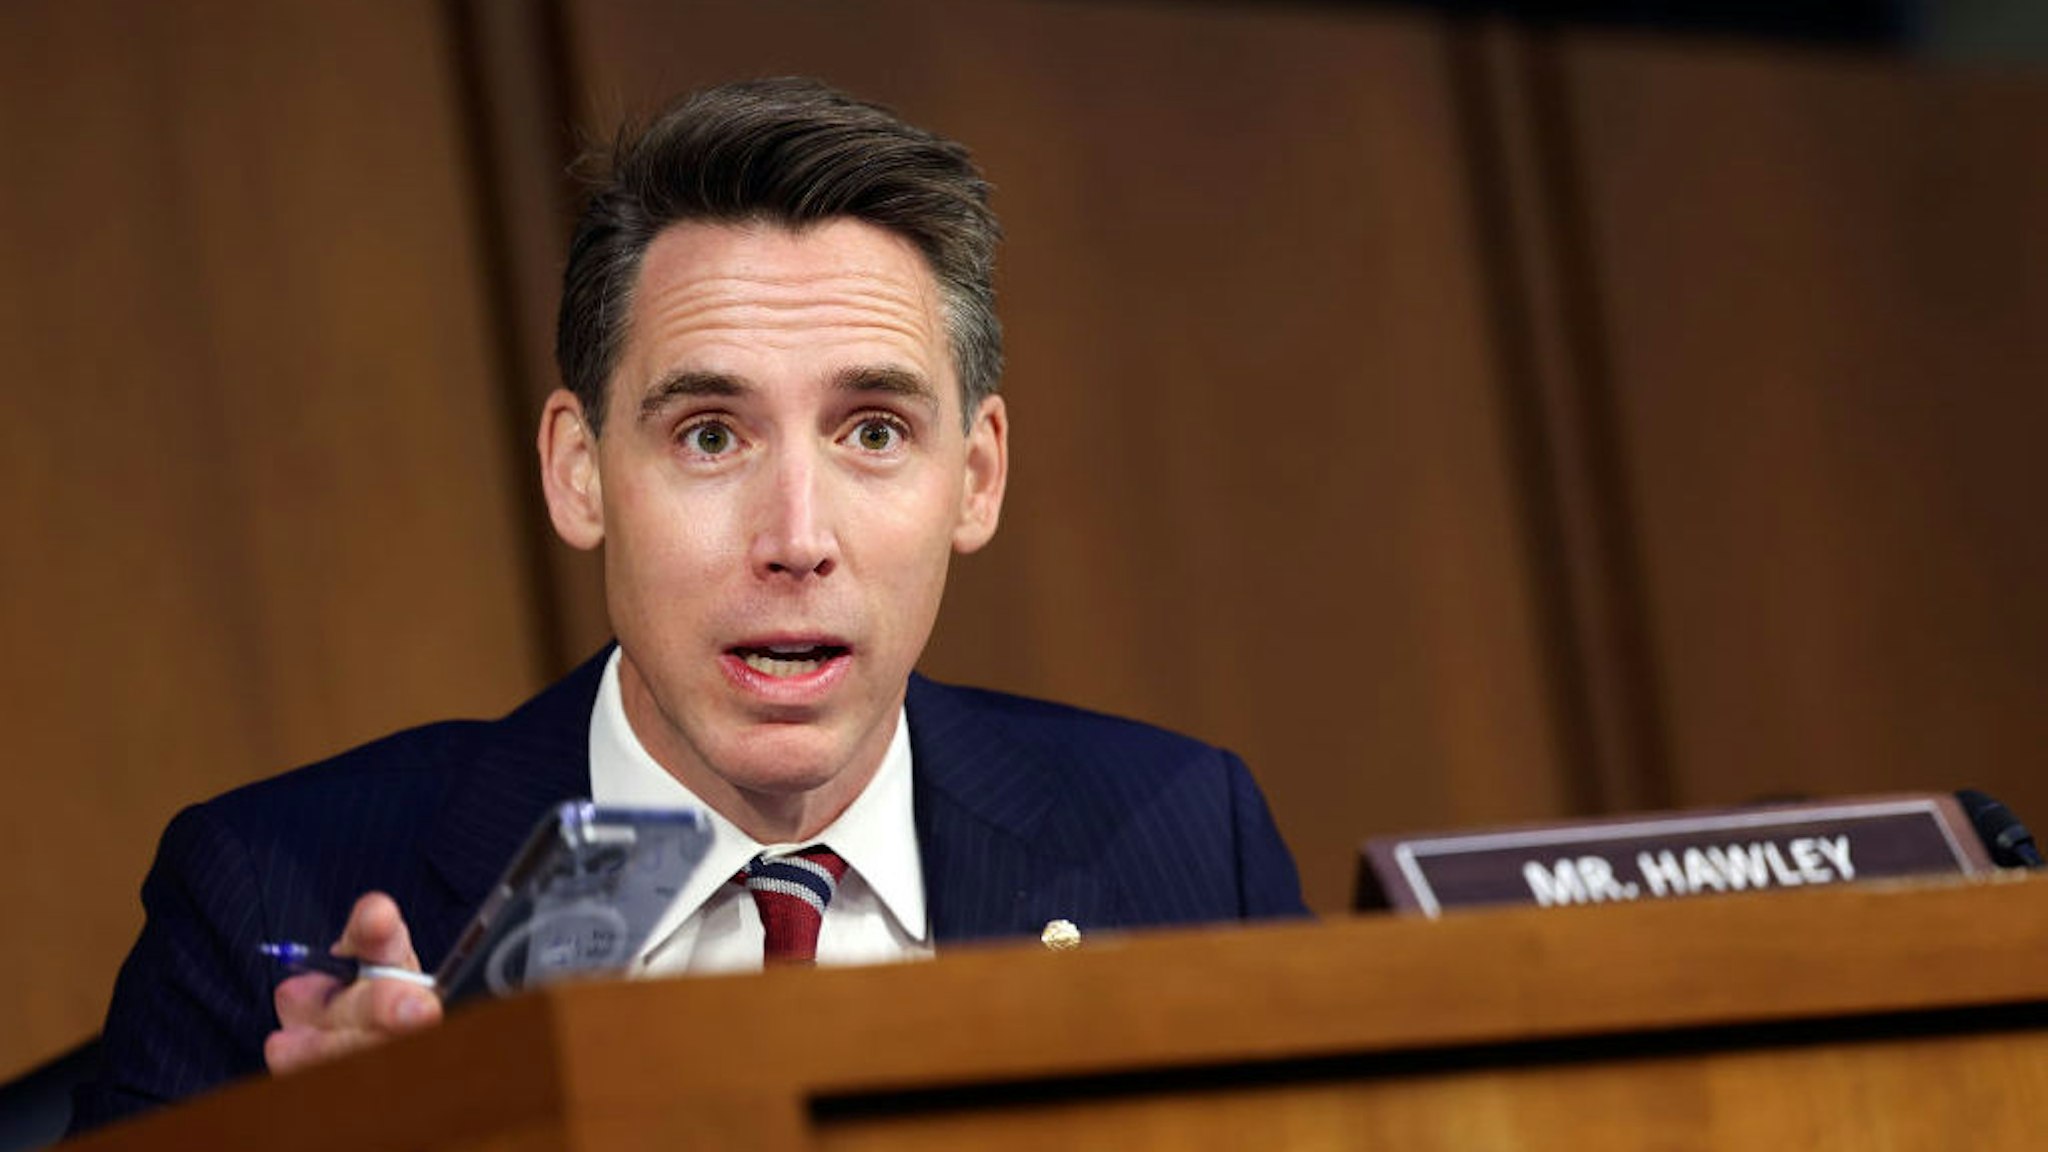 WASHINGTON, DC - SEPTEMBER 13: U.S. Sen. Josh Hawley (R-MO) questions Peiter “Mudge” Zatko, former head of security at Twitter, during Senate Judiciary Committee on data security at Twitter, on Capitol Hill, September 13, 2022 in Washington, DC. Zatko claims that Twitter's widespread security failures pose a security risk to user's privacy and information and could potentially endanger national security. (Photo by Kevin Dietsch/Getty Images)